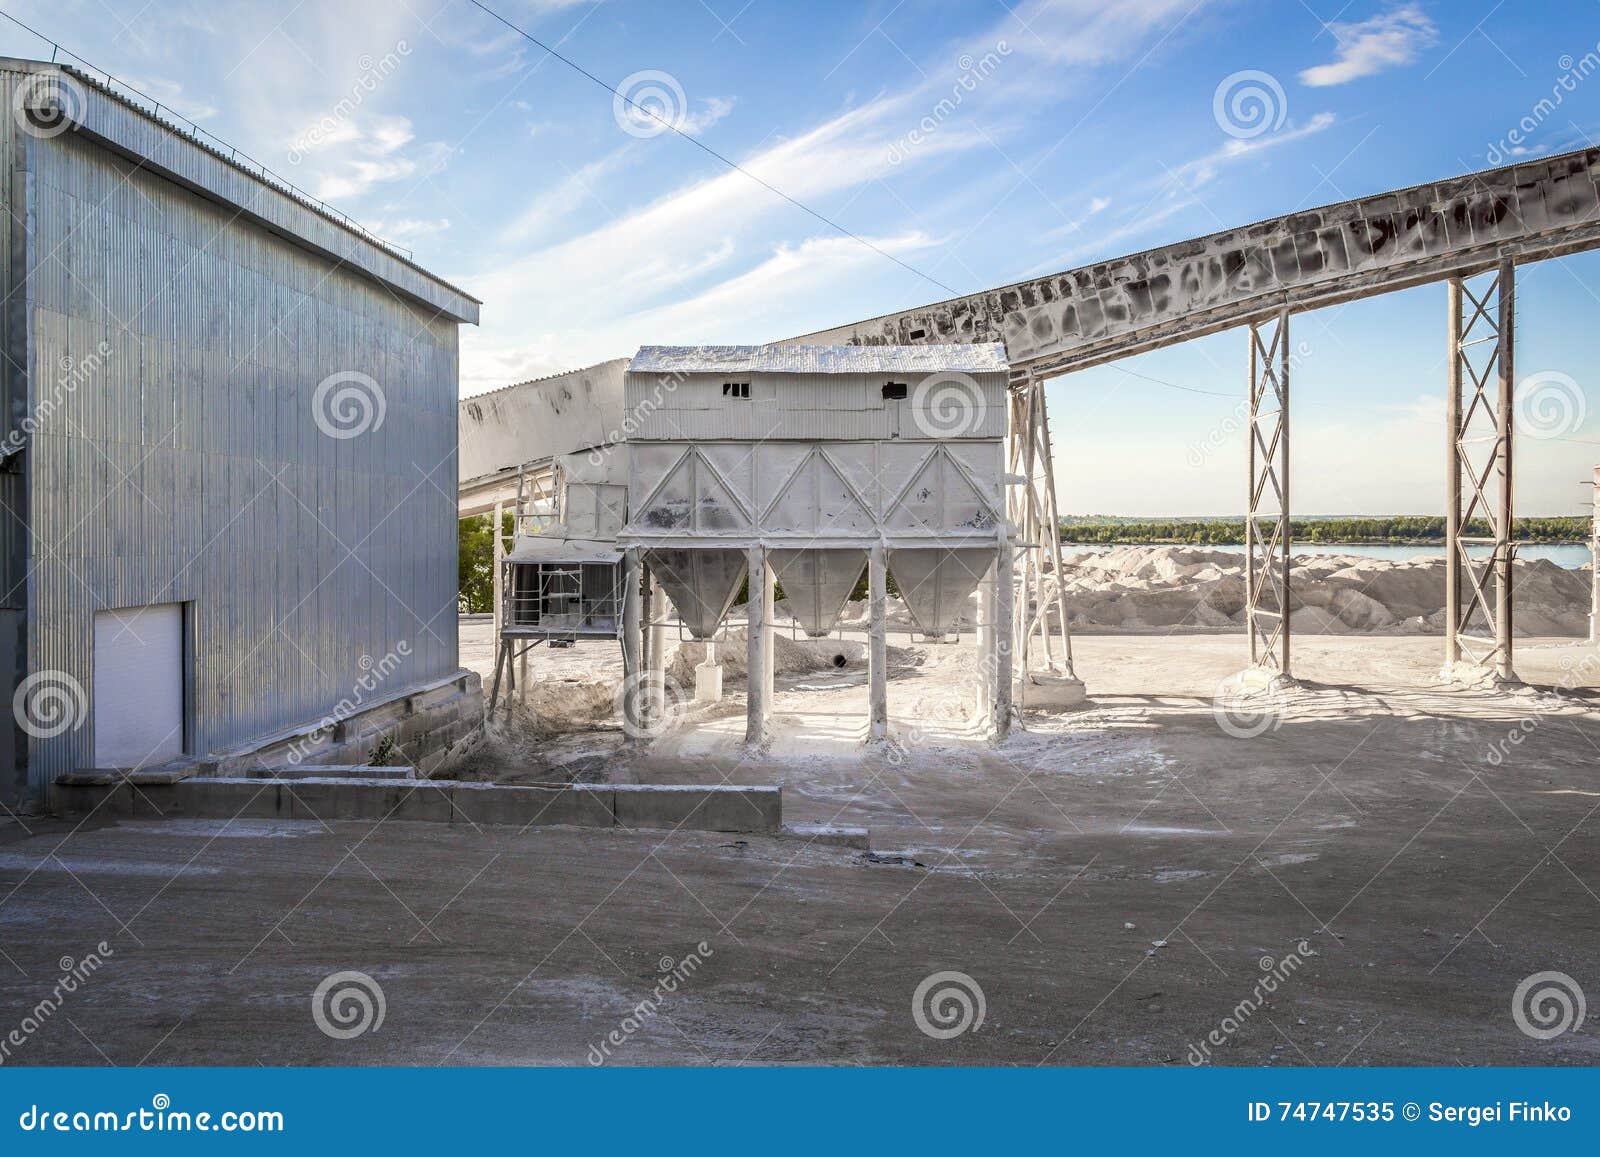 Part of a Small Cement Factory Stock Image - Image of machinery, color